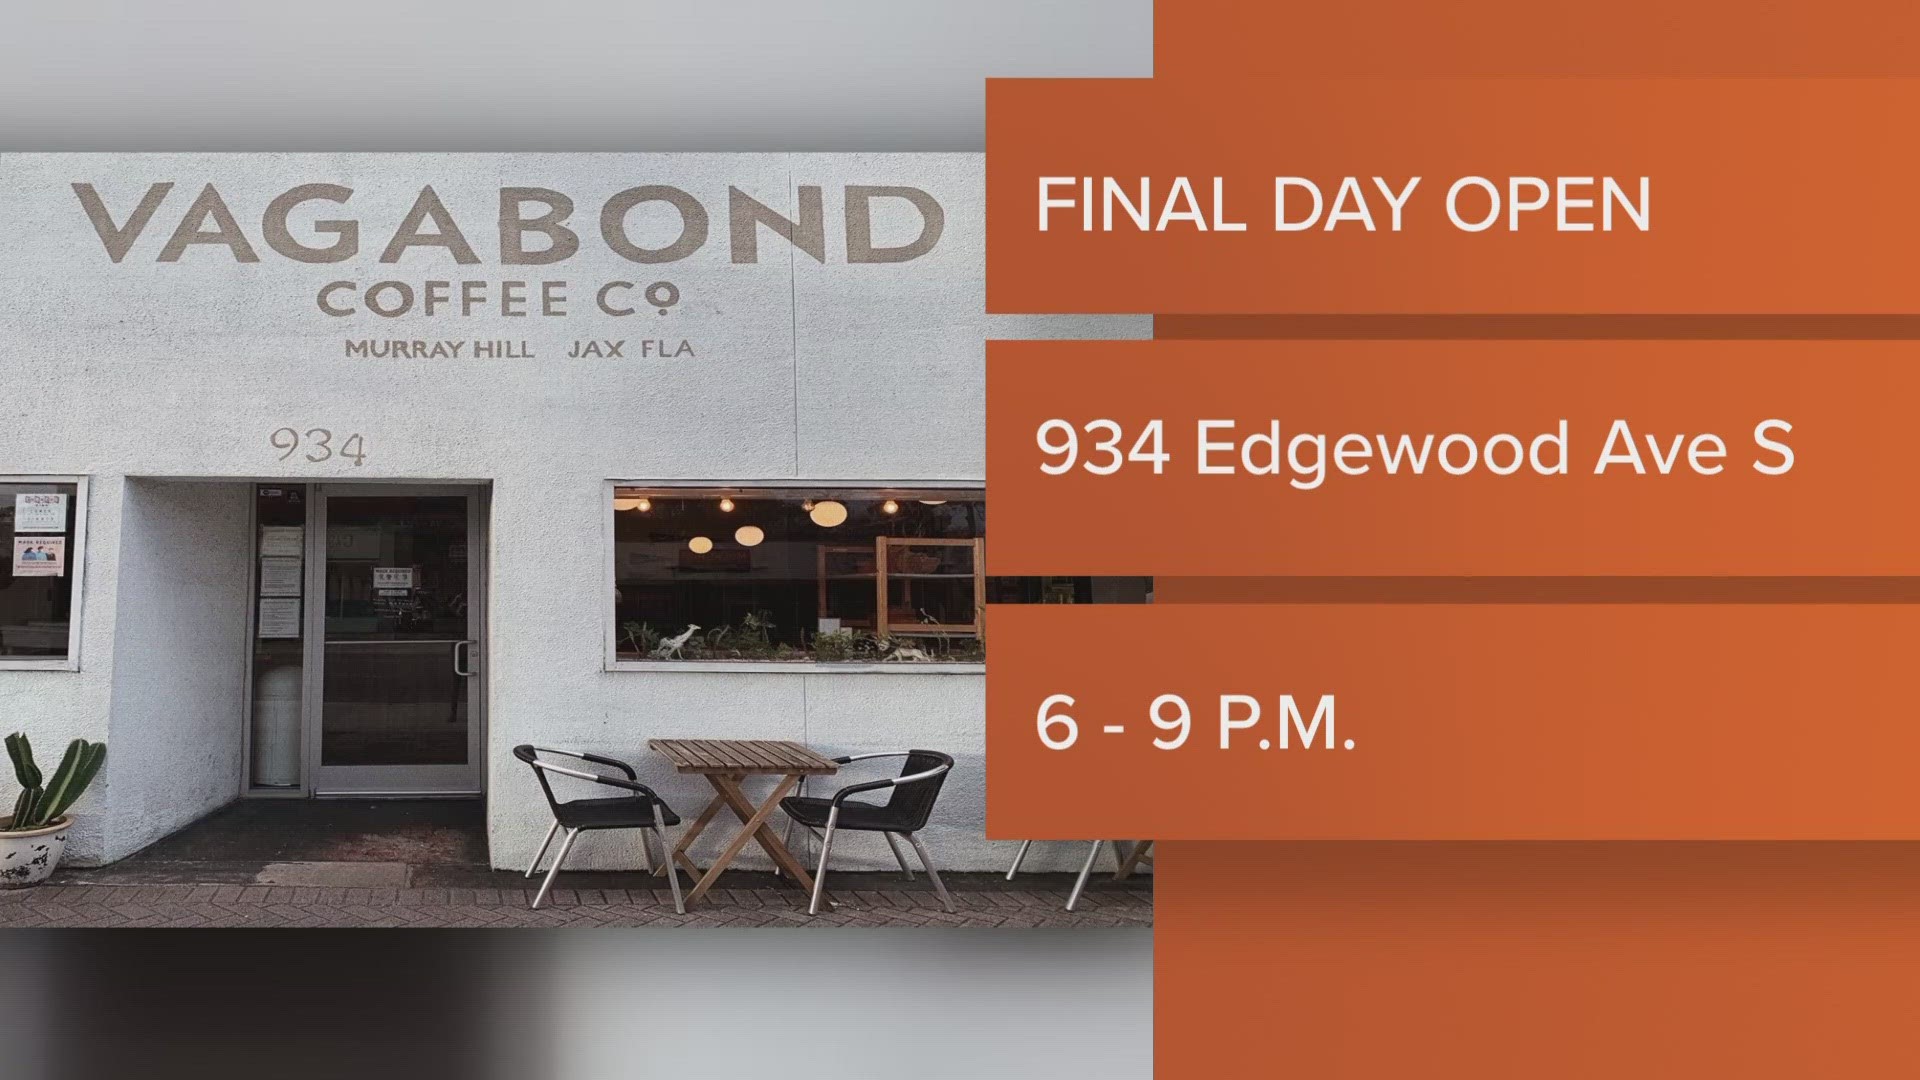 Vagabond Coffee Co. in Murray Hill announced last month that they would close to focus on family and other endeavors. The farewell party will be from 6 to 9 p.m.